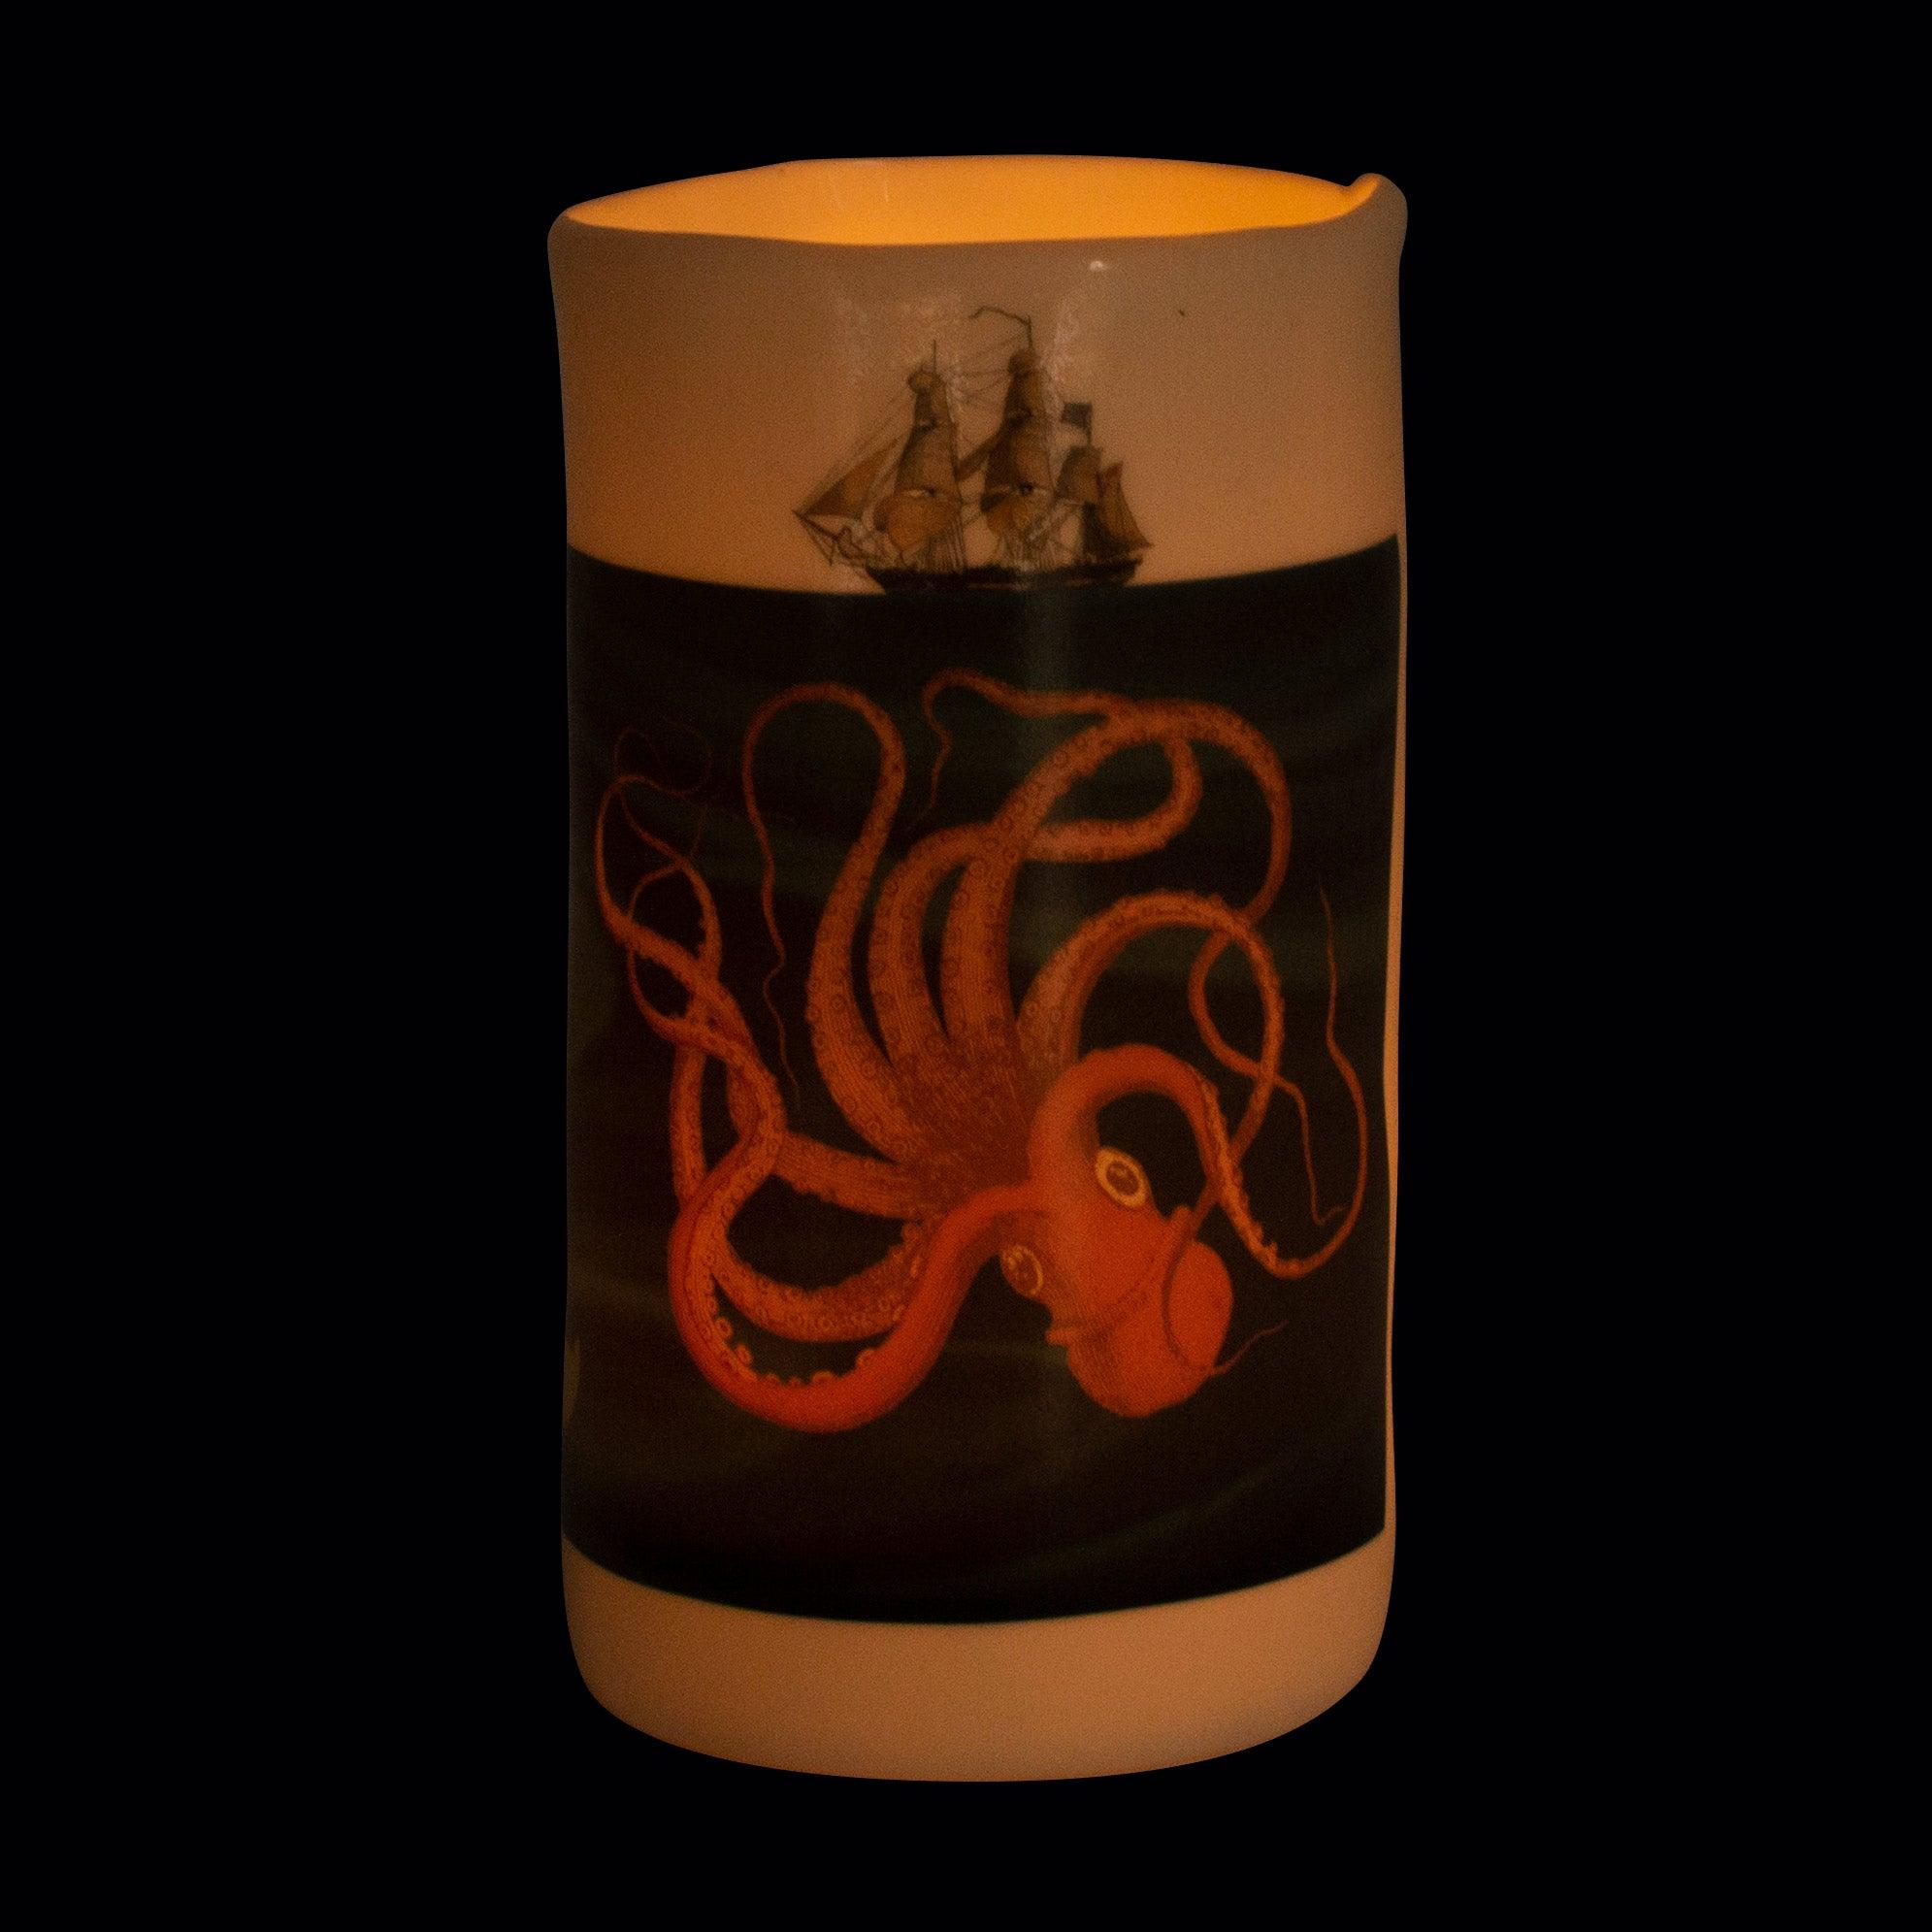 Product photo of Sea Creatures Transforming Tealight Holder, a novelty gift manufactured by The Unemployed Philosophers Guild.